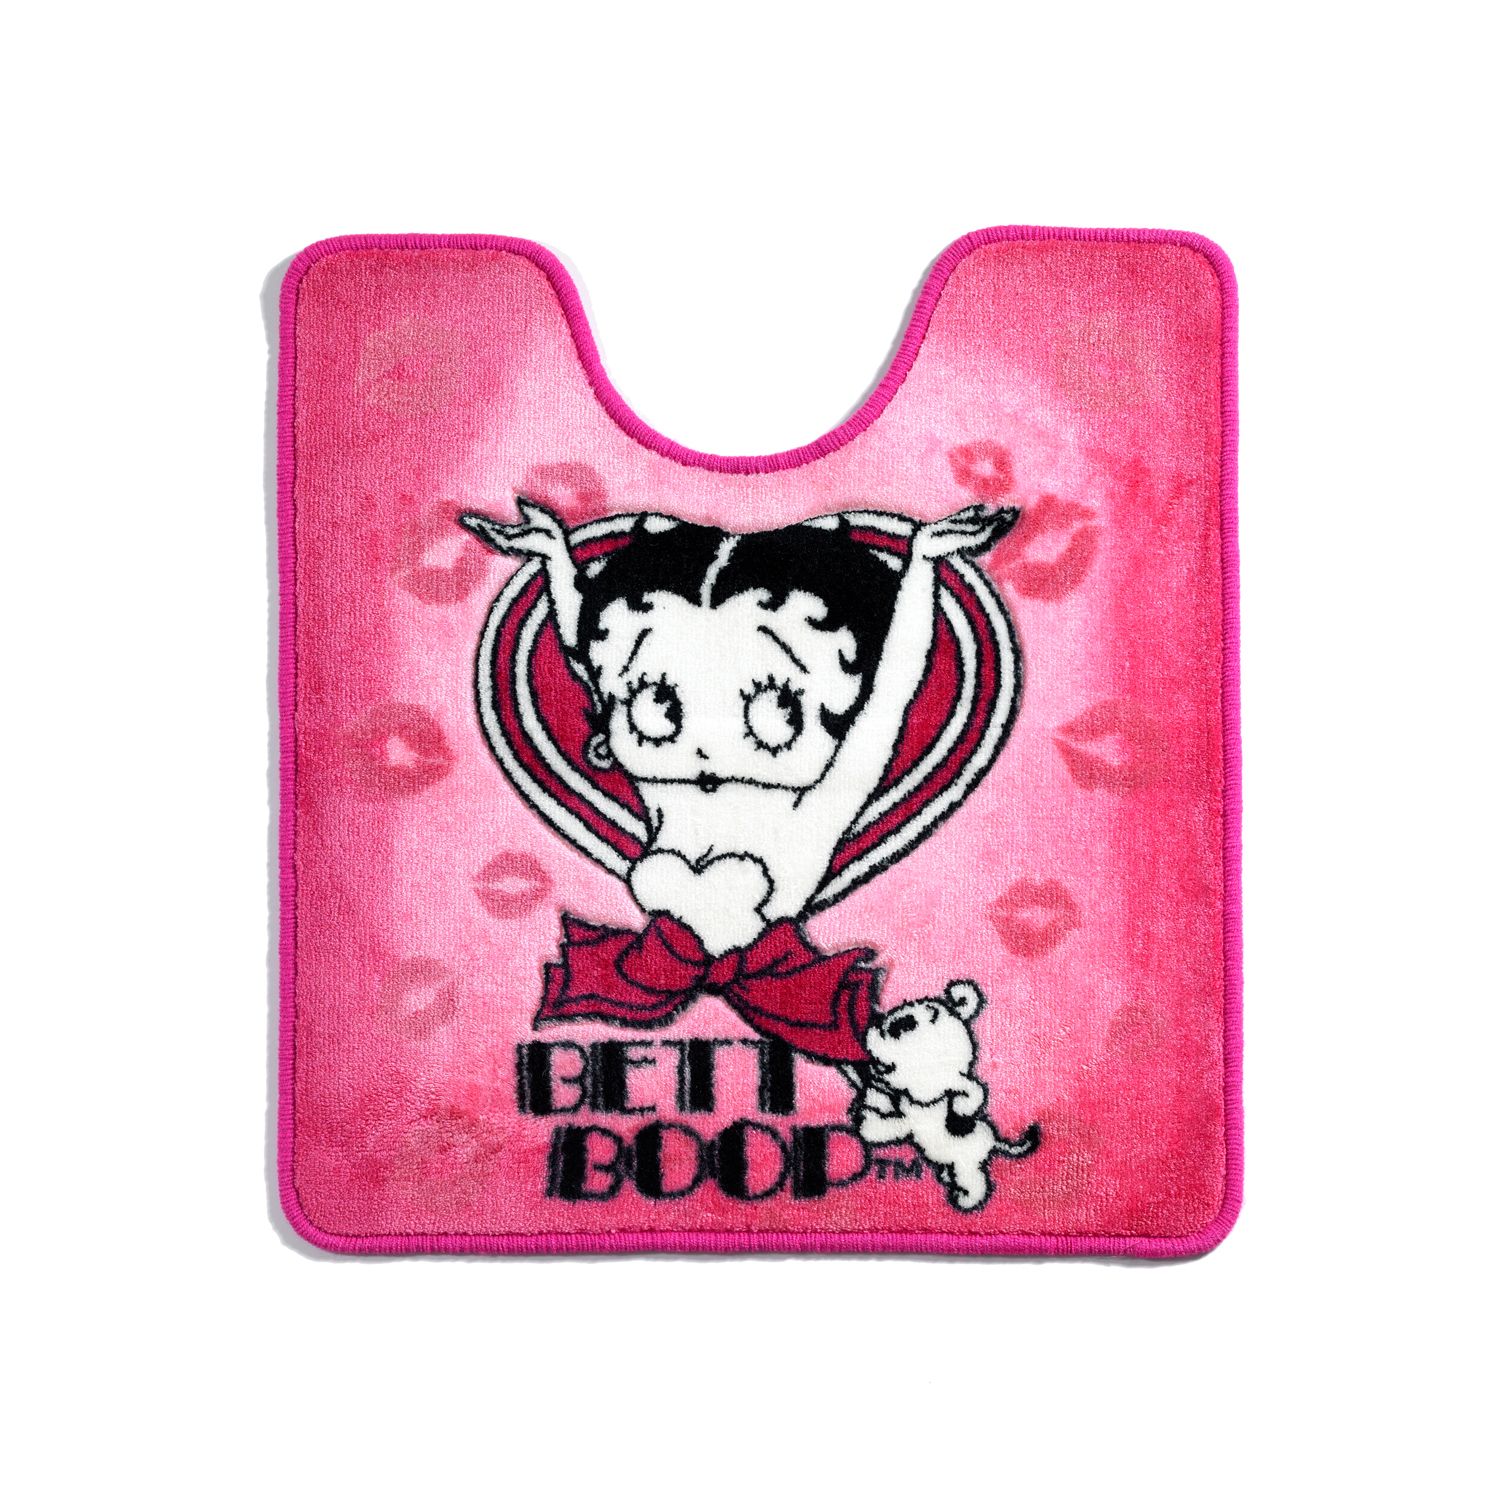 Popular Bath Products BETTY BOOP"PINK"HT.CONTOUR W/LATEX BACK